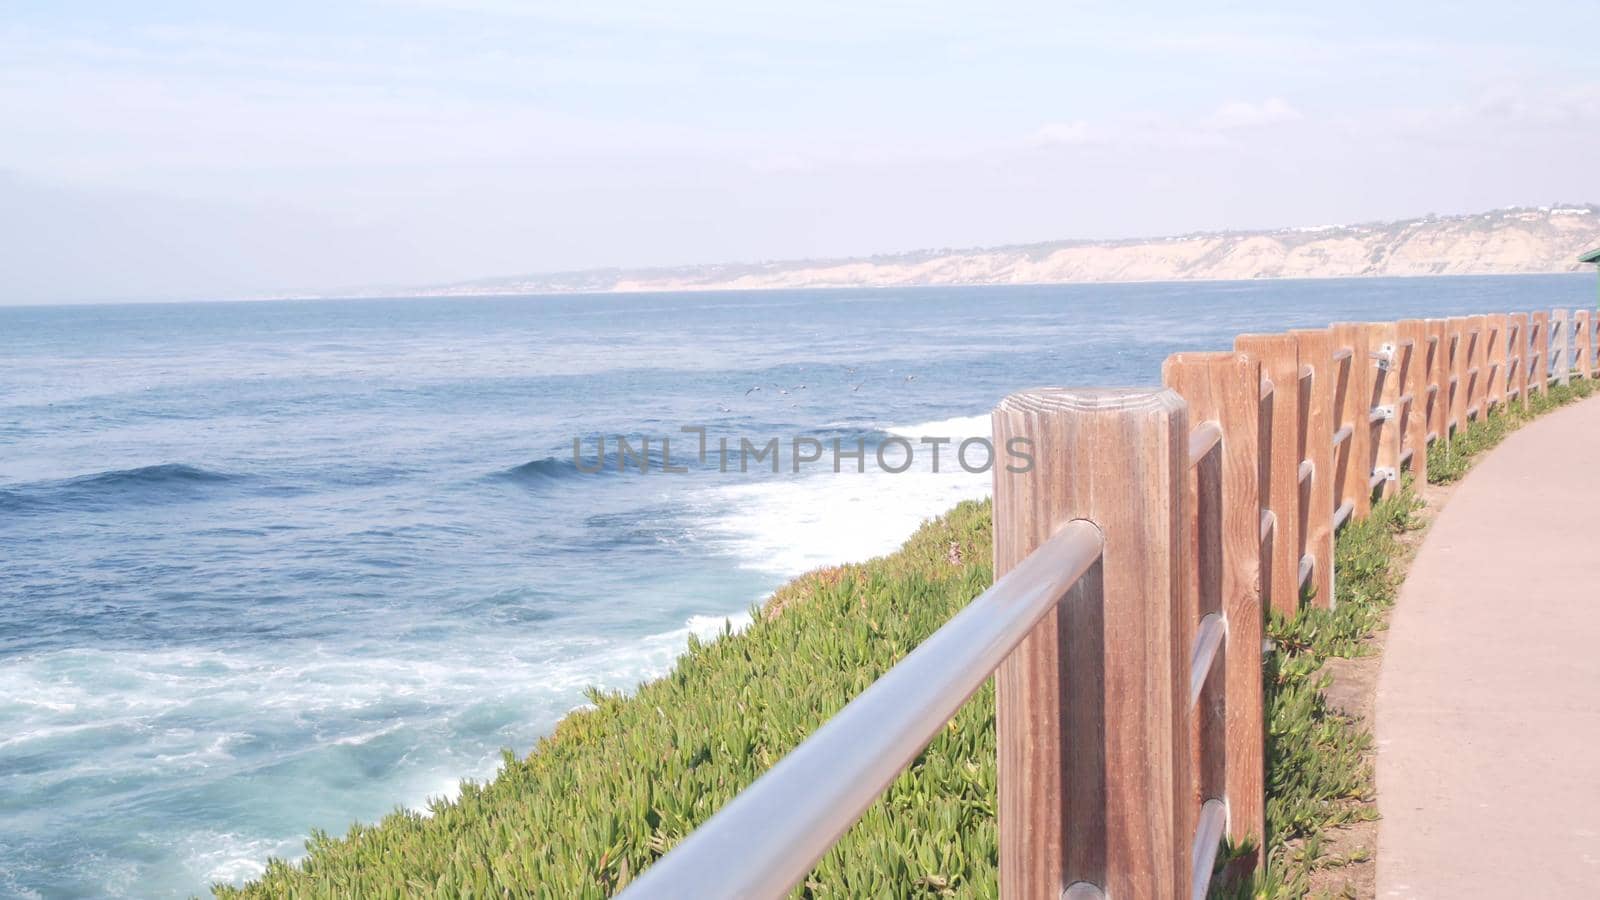 Ocean waves crashing on beach, sea water surface from above, cliff or bluff, La Jolla shore waterfront promenade, California USA. Succulent green ice plant, pacific coast. Seascape view and railings.